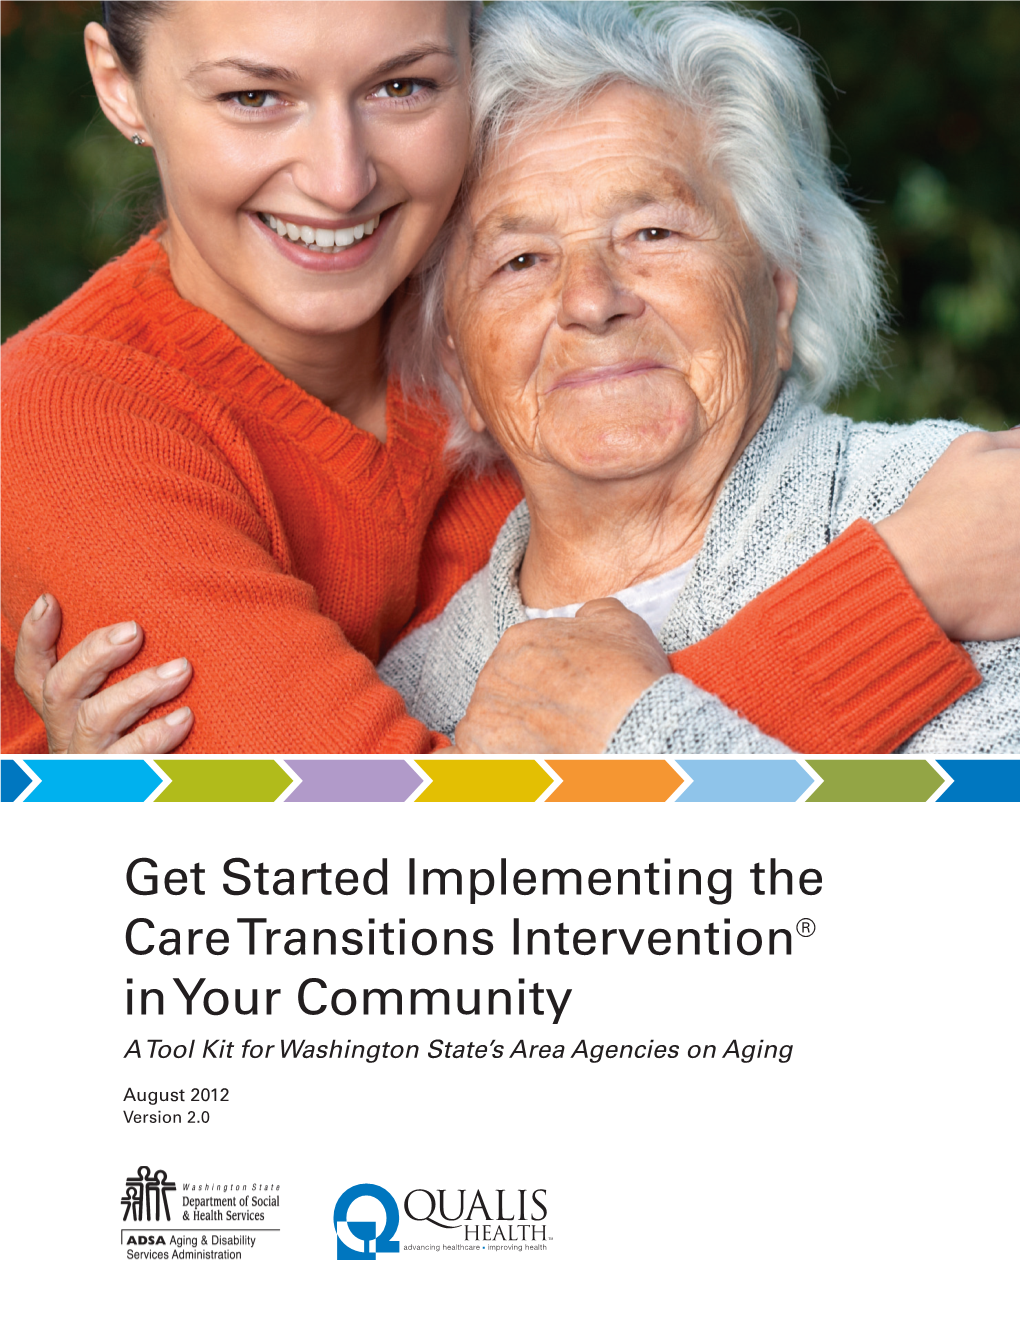 Get Started Implementing the Care Transitions Intervention® in Your Community a Tool Kit for Washington State’S Area Agencies on Aging